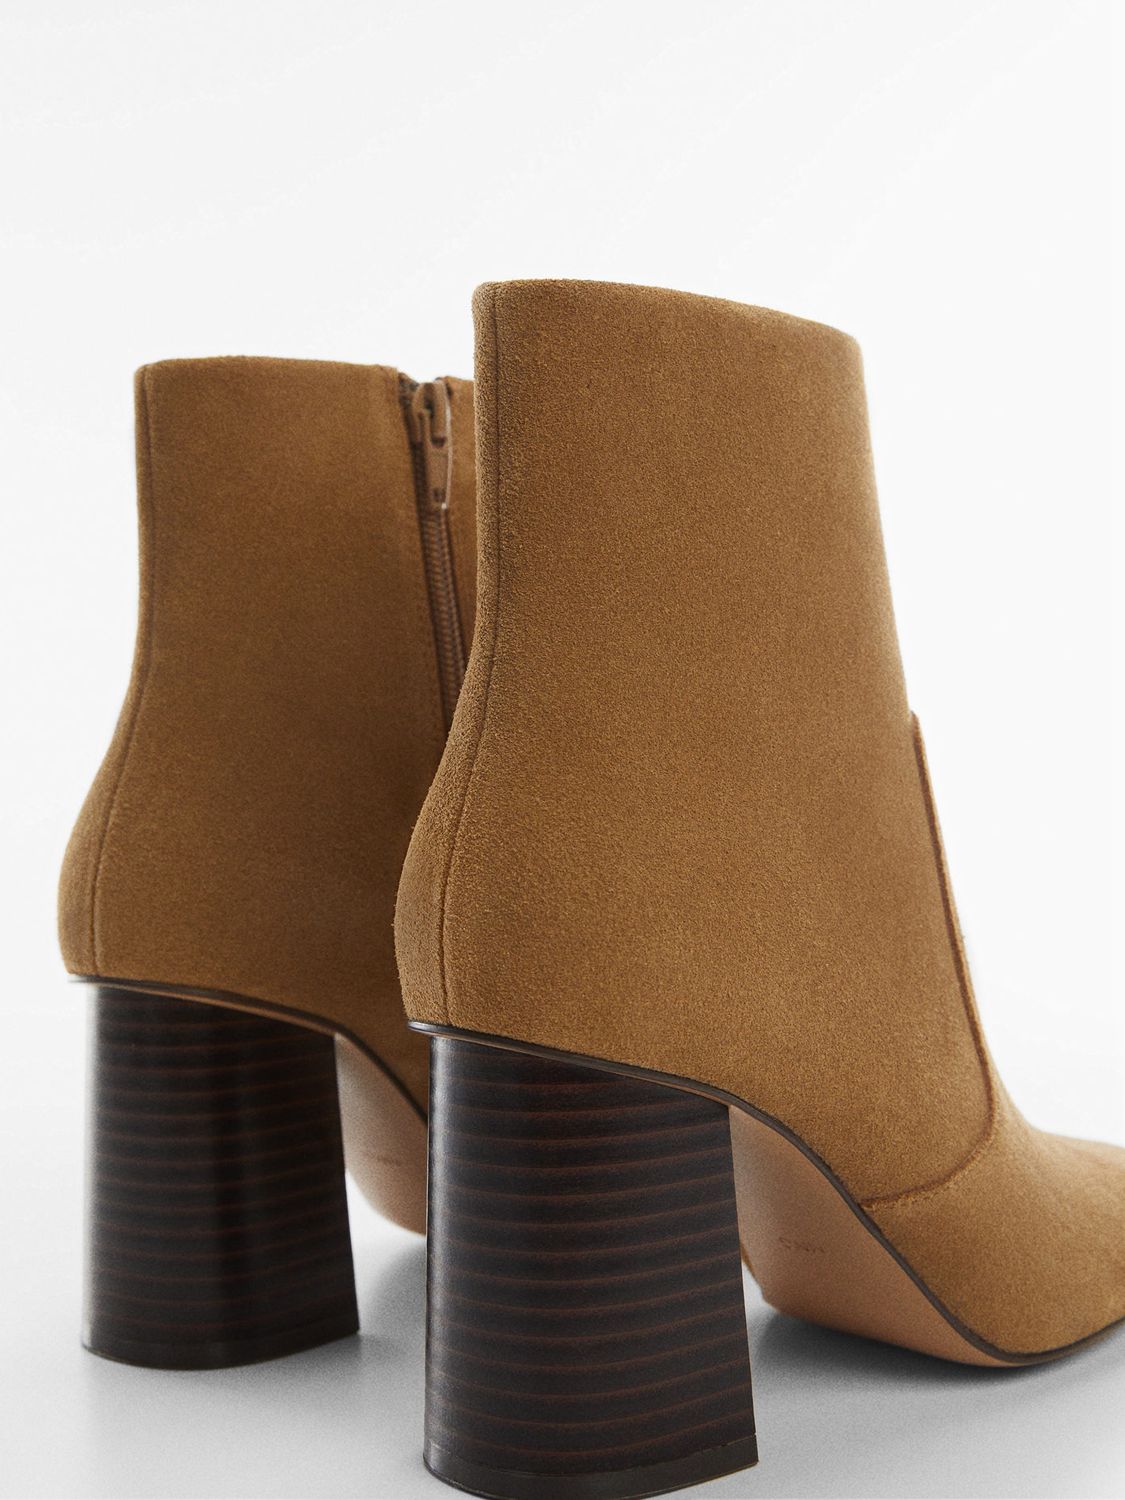 Mango Gandy Leather Block Heel Ankle Boots, Brown at John Lewis & Partners